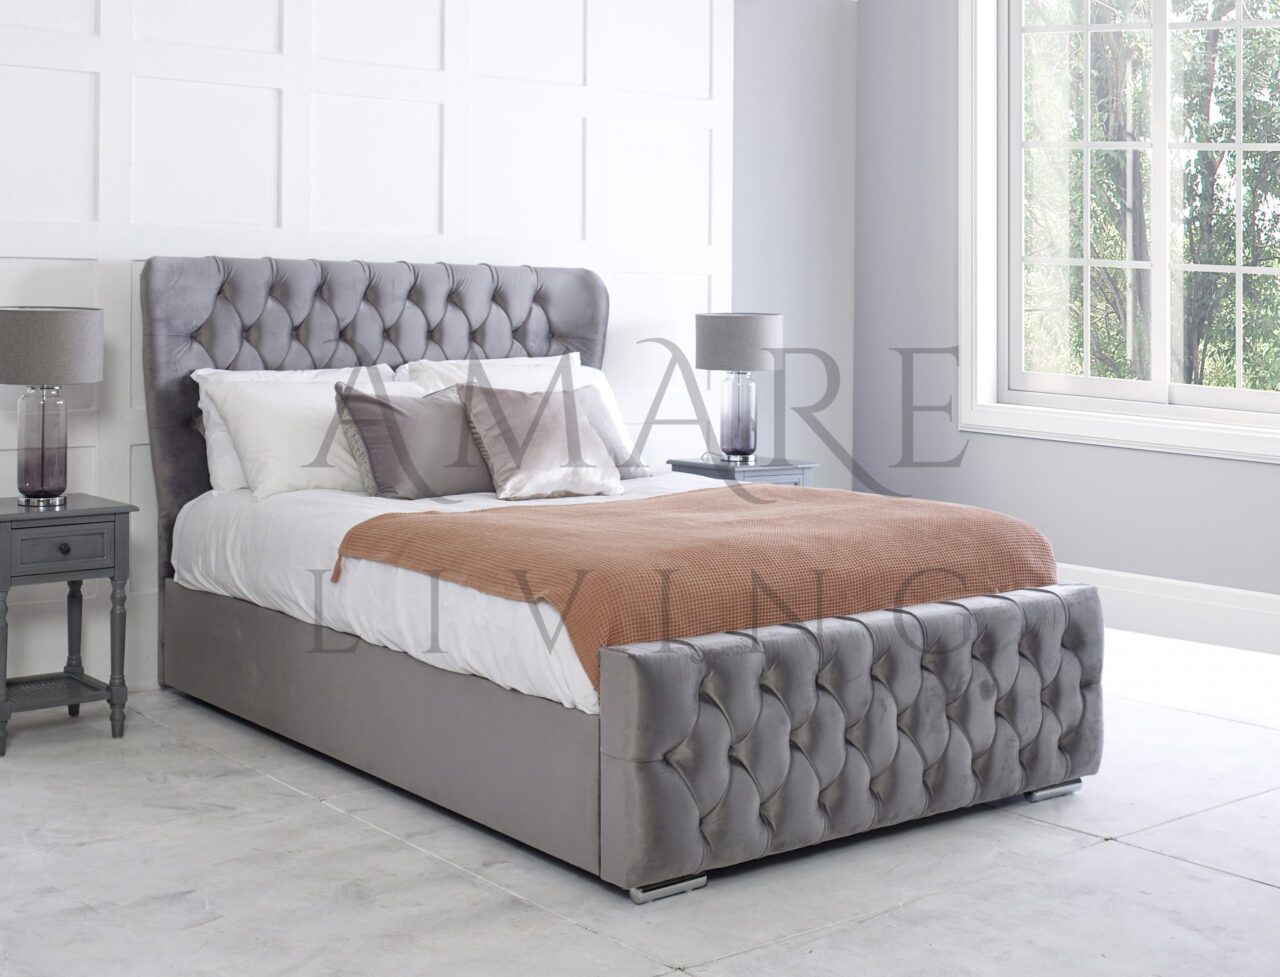 Double 4FT 6, Silver Velvet Unmatchable Ottoman Storage Diamond Design Upholstered Bed Frame in Velvet or Chenille available in Double or King Size